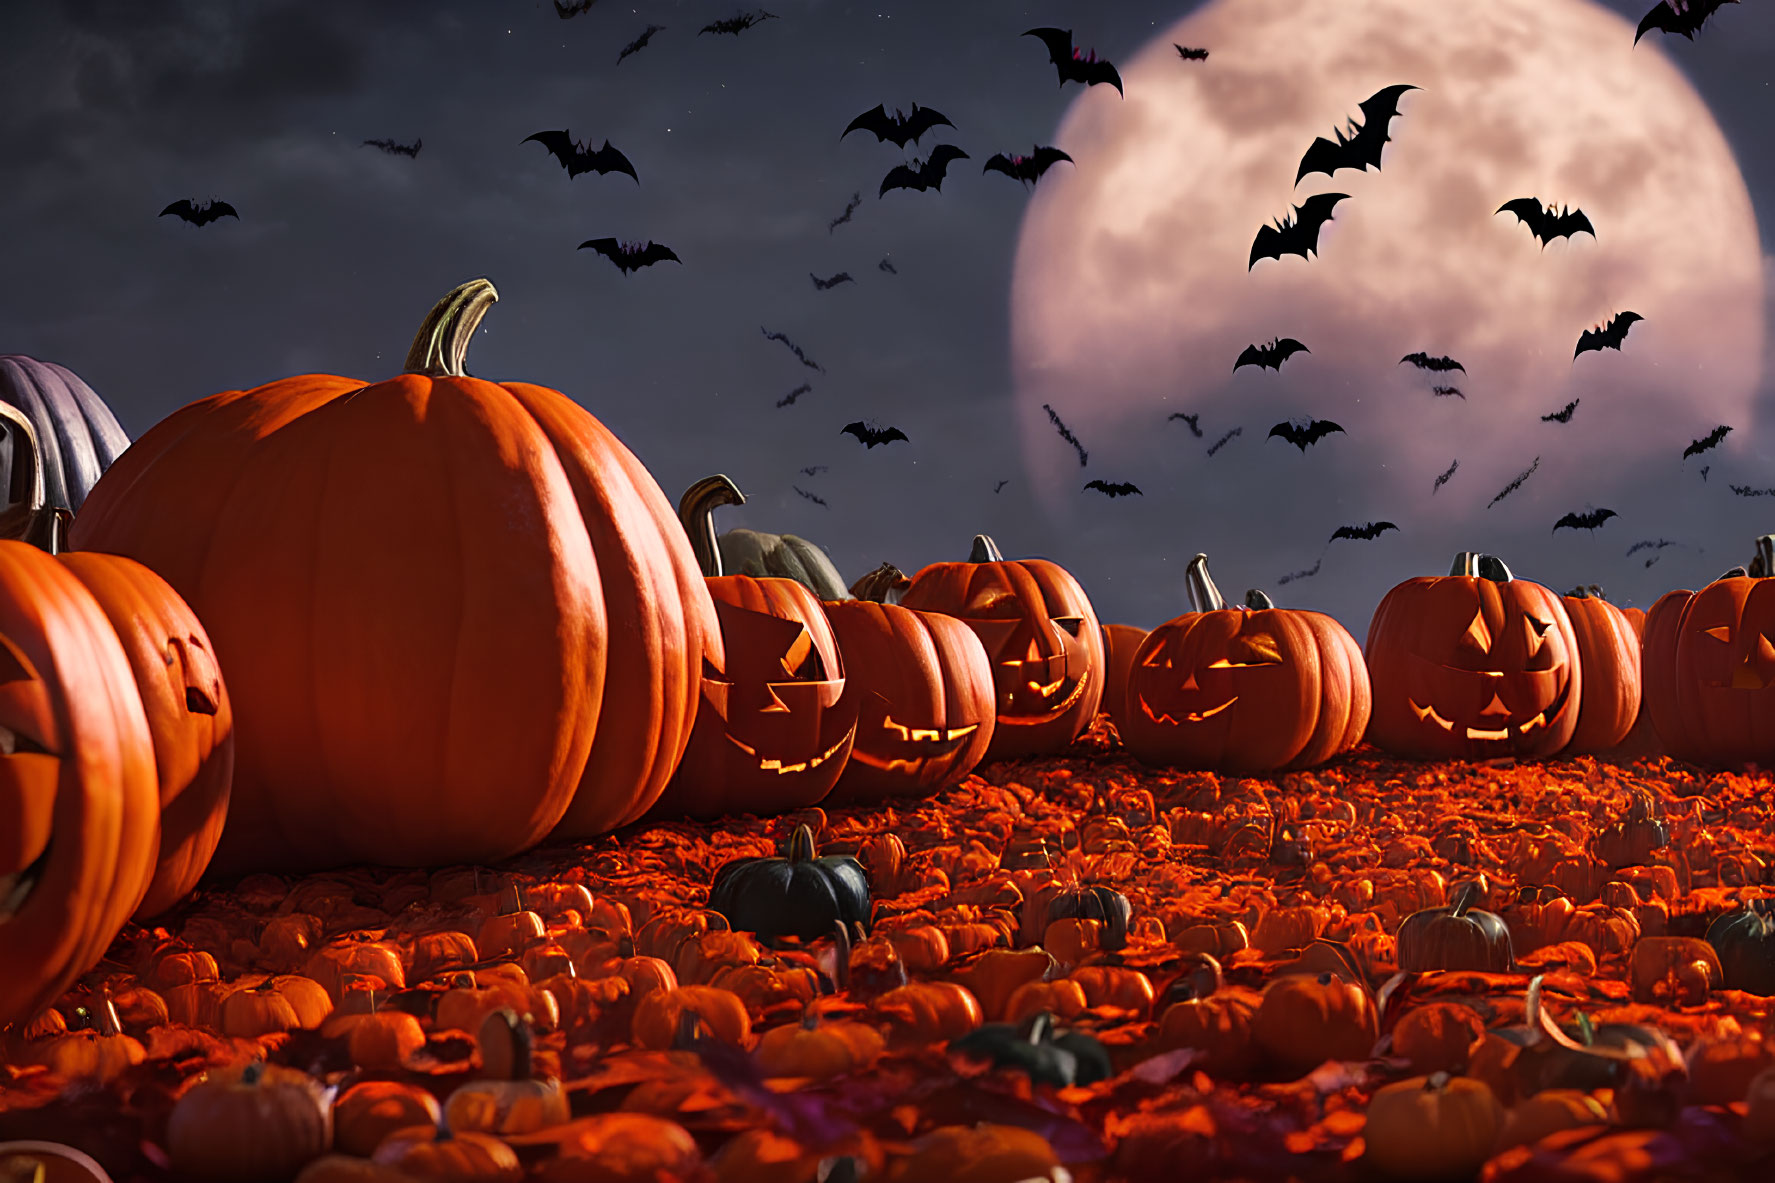 Field of Pumpkins and Jack-o'-lanterns under Full Moon and Bats